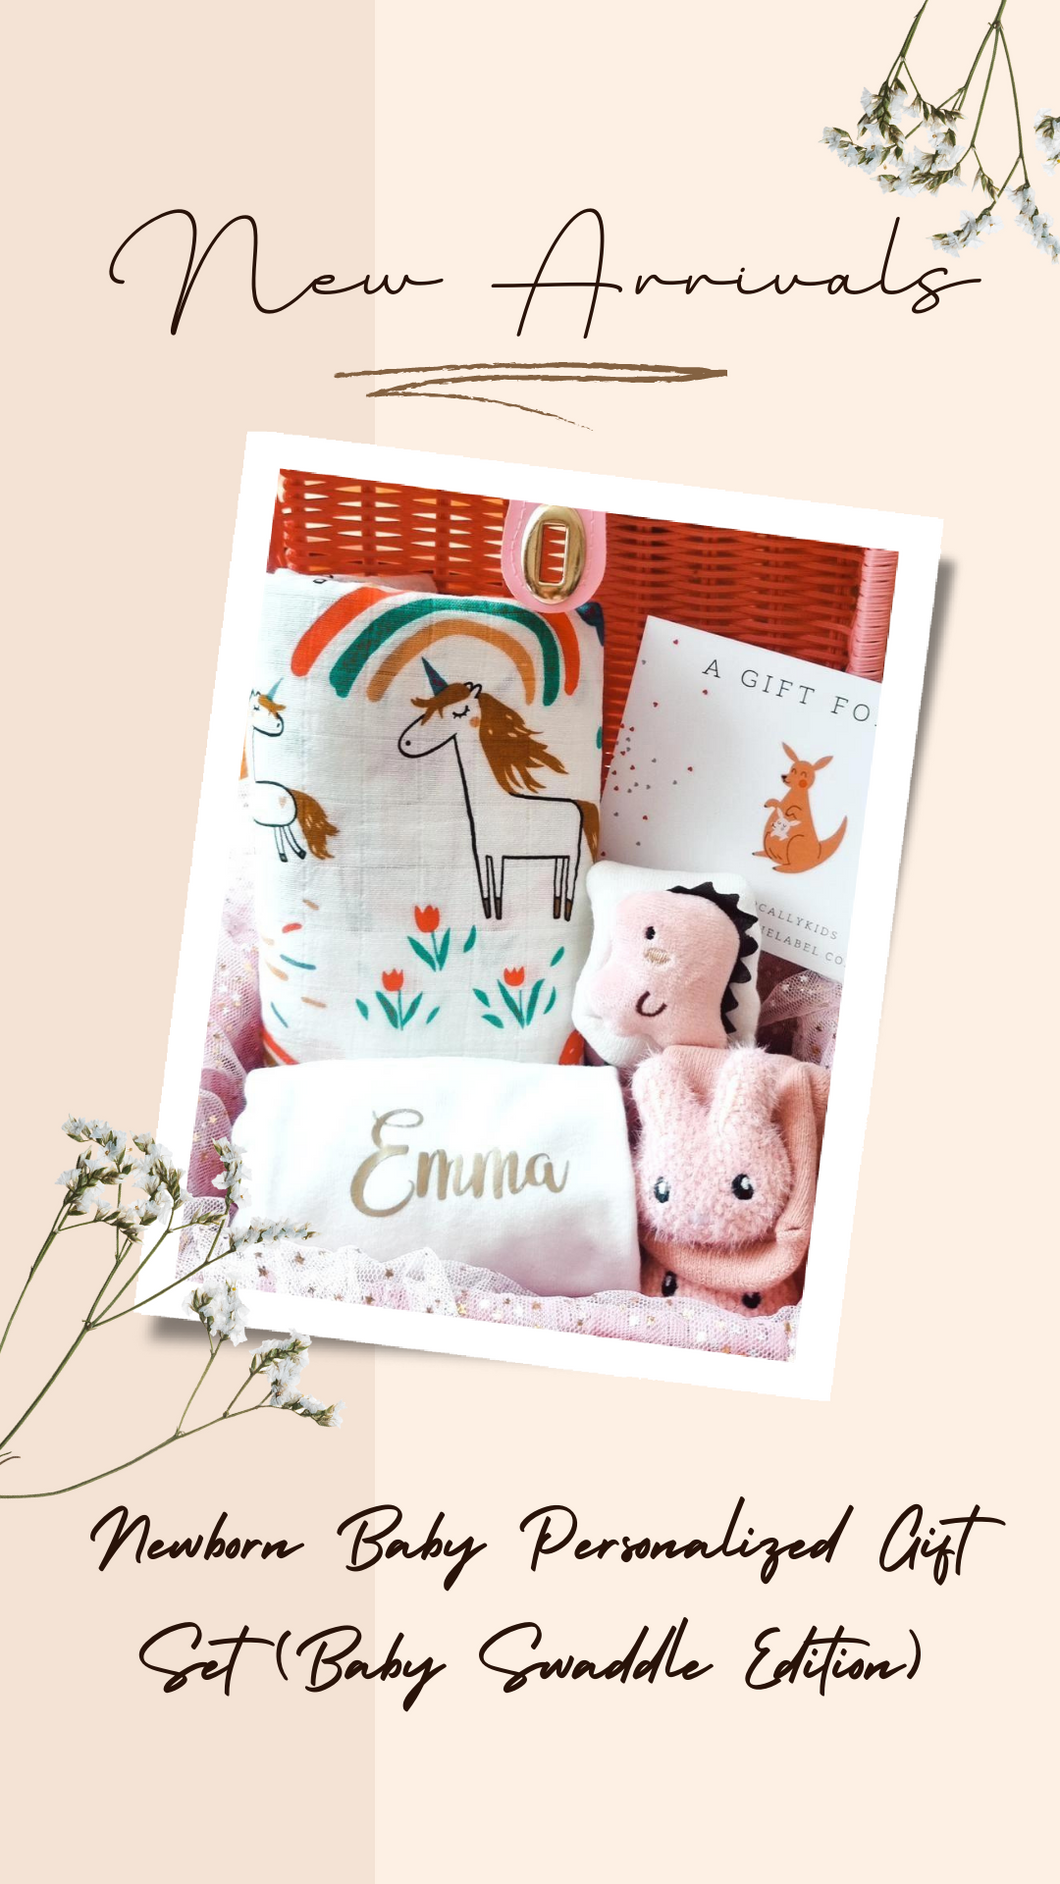 Newborn Baby Girl Personalized Gift Set (Baby Swaddle Edition)